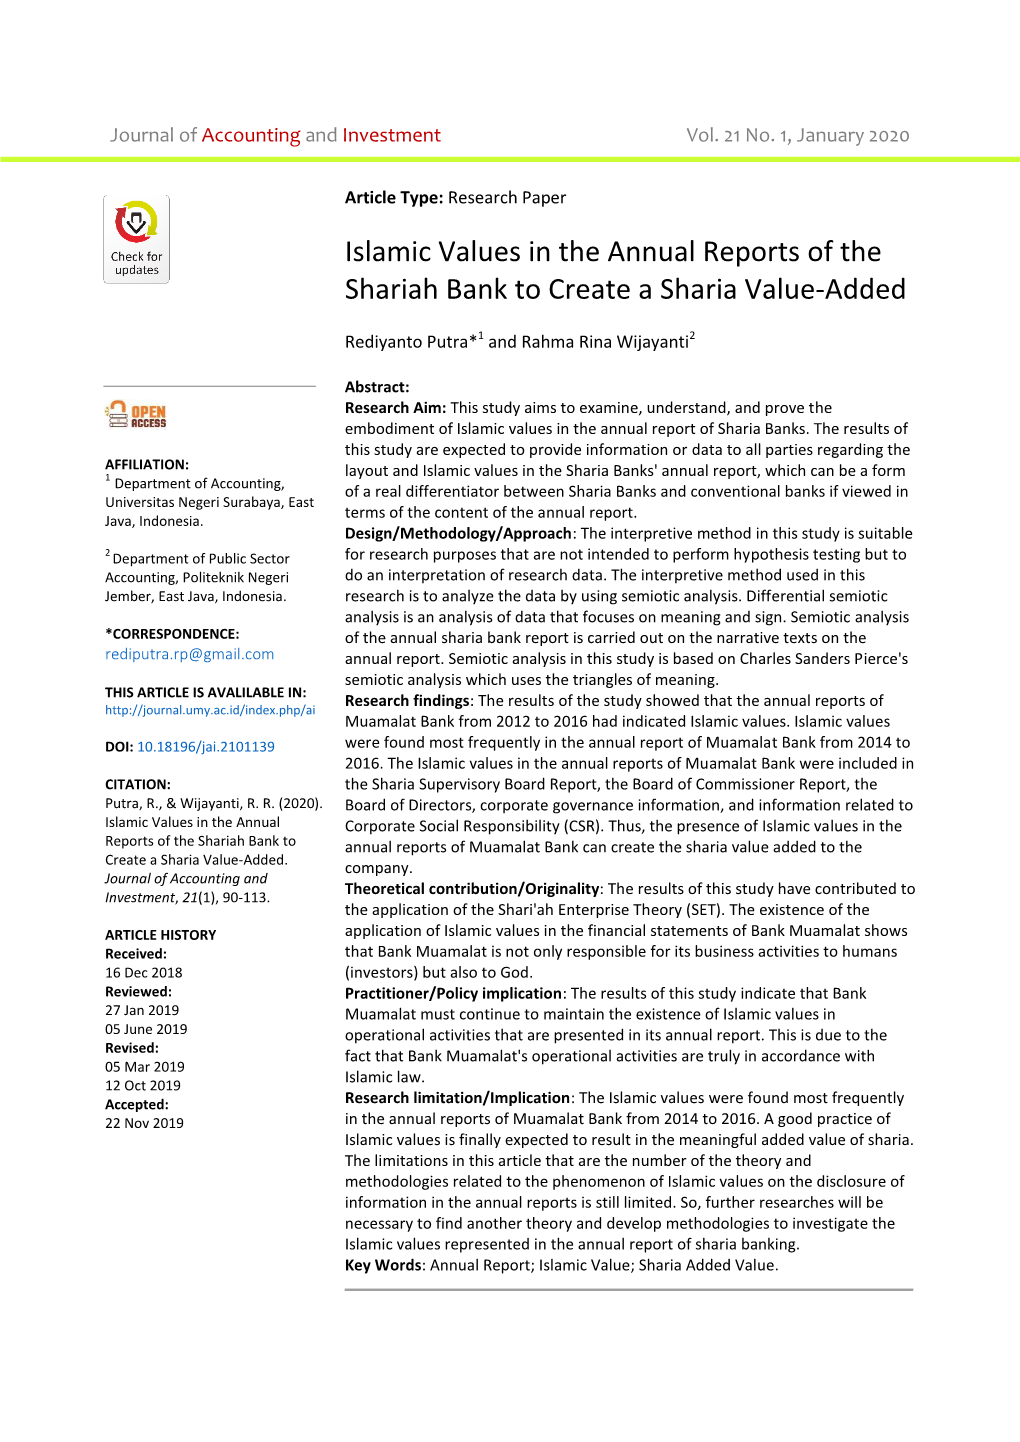 Islamic Values in the Annual Reports of the Shariah Bank to Create a Sharia Value-Added